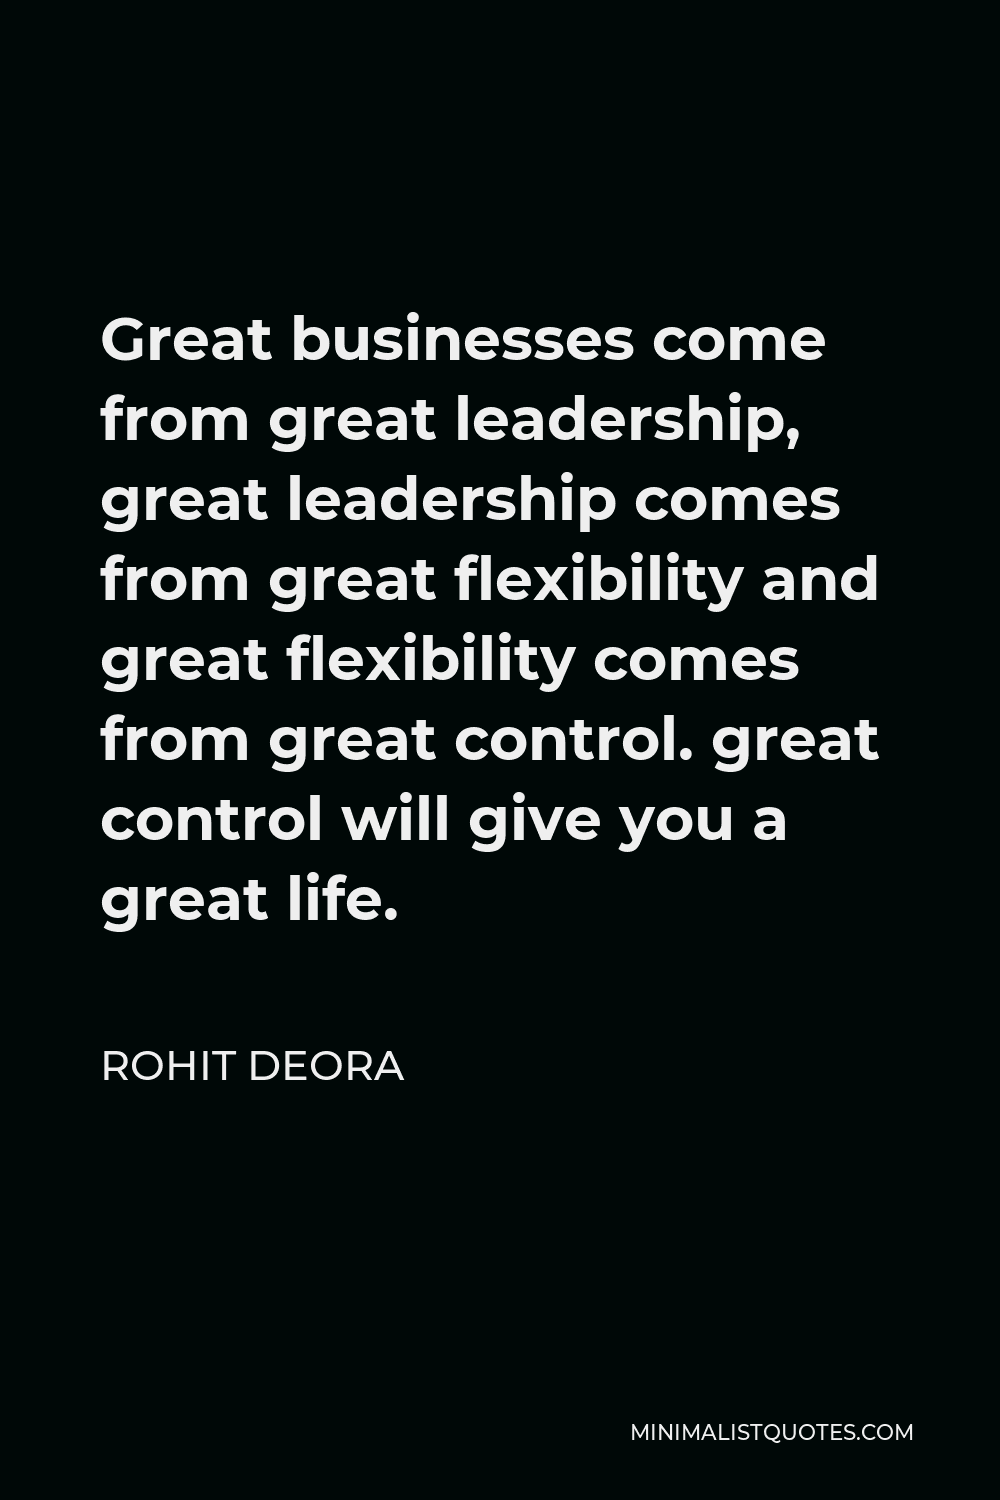 Rohit Deora Quote - Great businesses come from great leadership, great leadership comes from great flexibility and great flexibility comes from great control. great control will give you a great life.